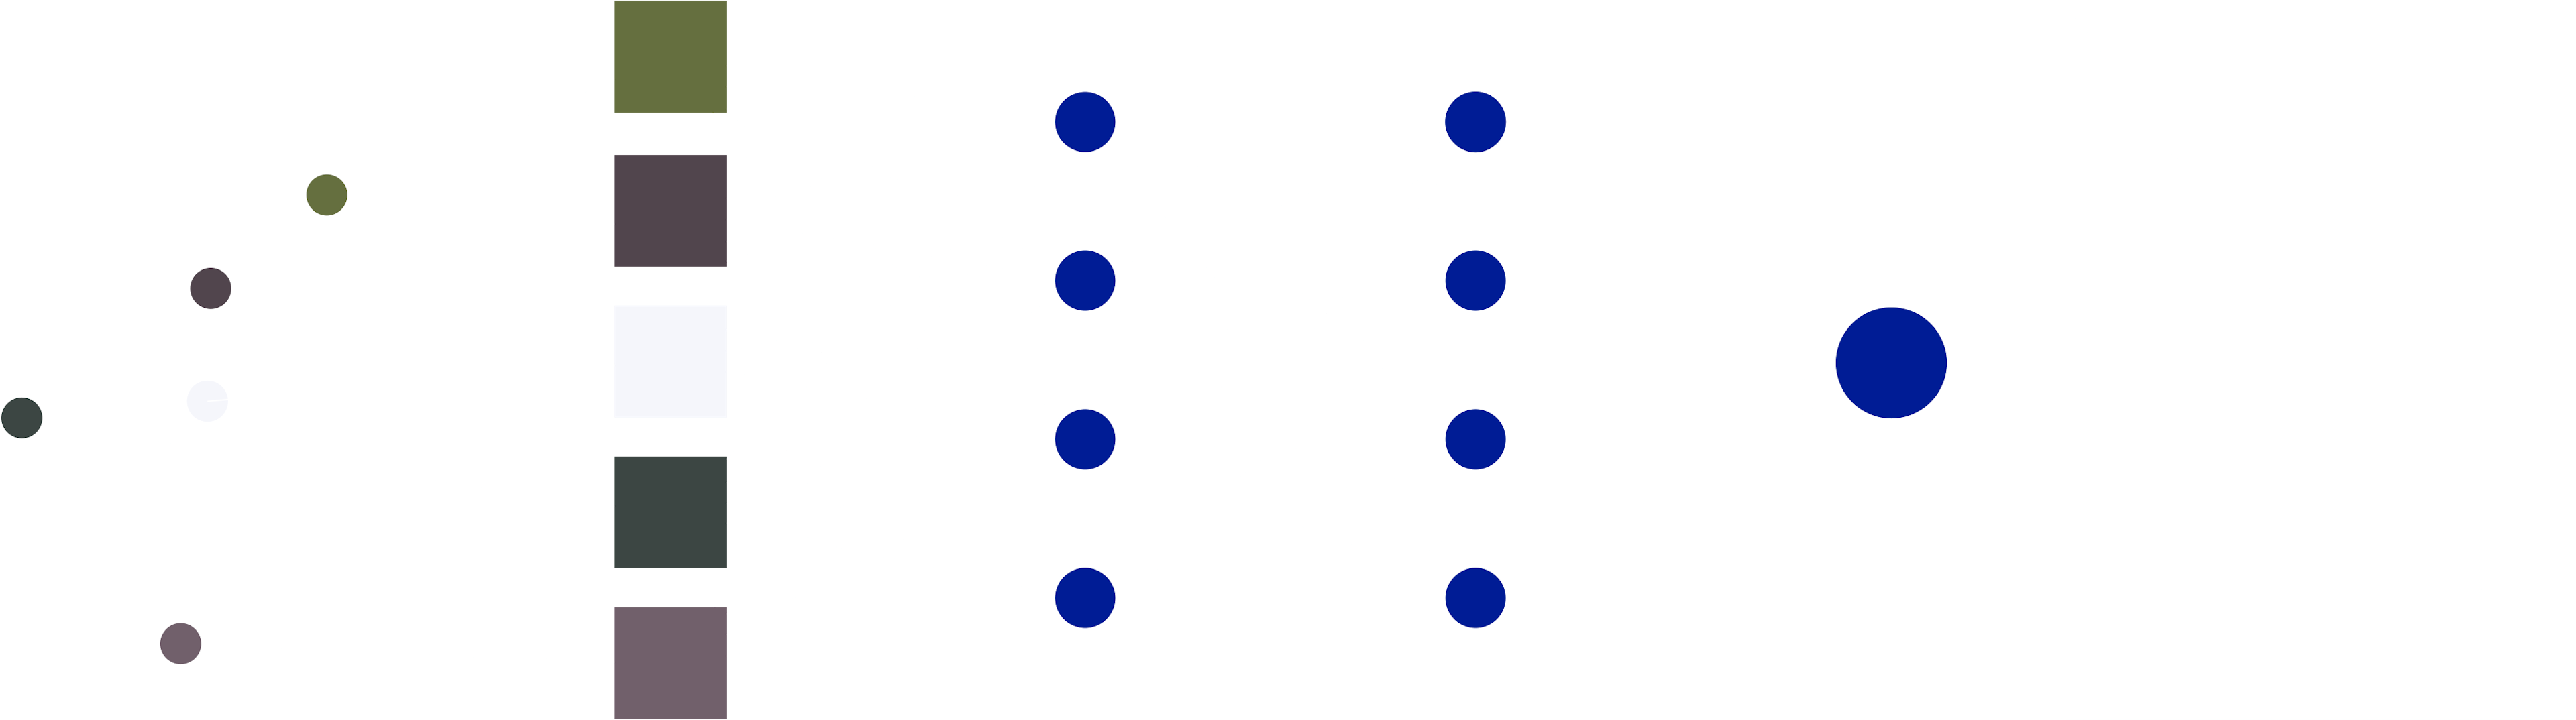 Graphic rendering of a neural network